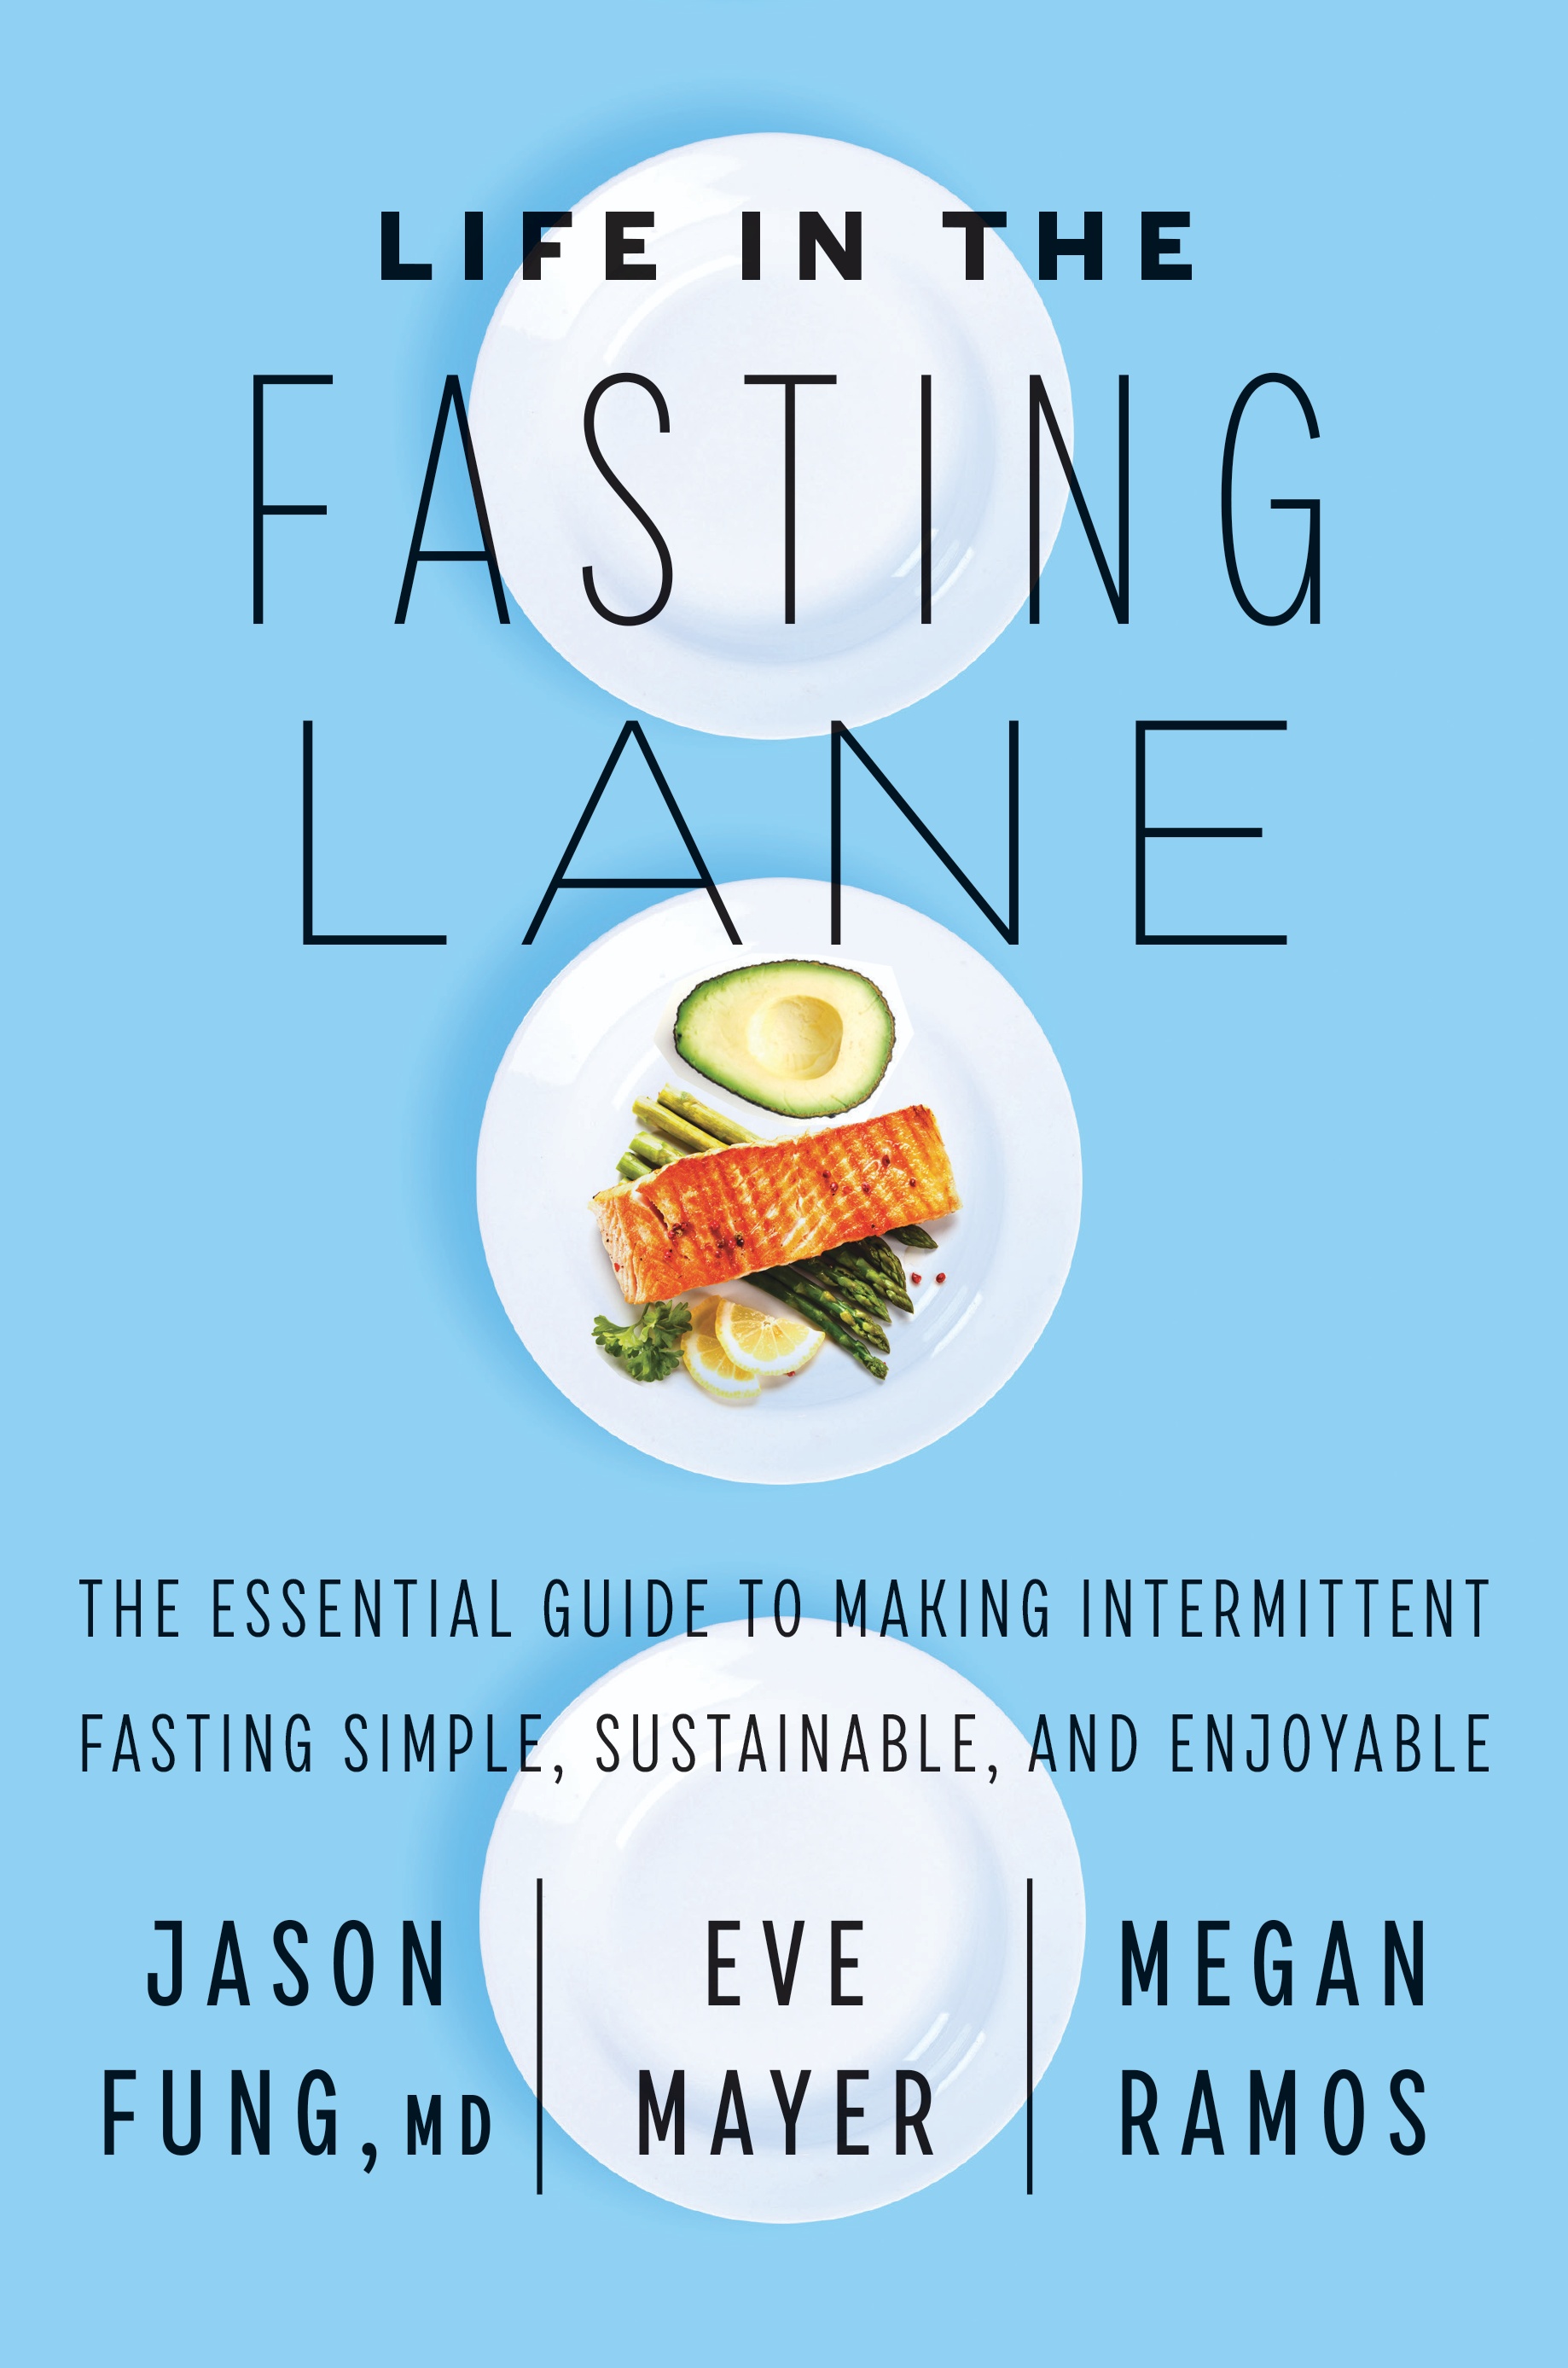 Life in the Fasting Lane: The Essential Guide to Making Intermittent Fasting Simple, Sustainable, and Enjoyable By Dr. Jason Fung, Megan Ramos, and Eve Mayer